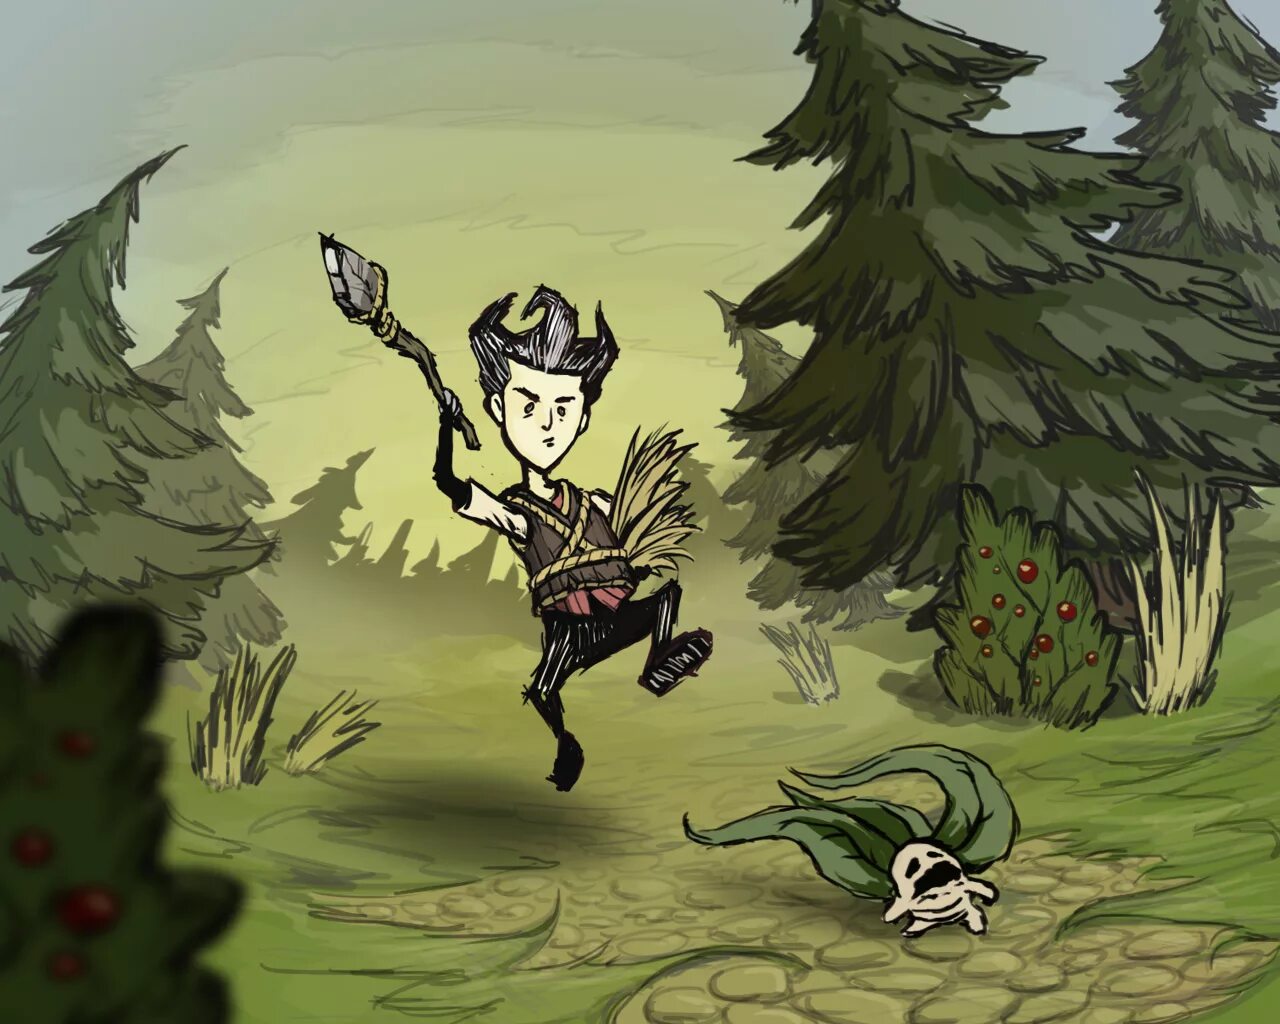 Уилсон don't Starve. Мандрагора don't Starve. Корень Мандрагоры don't Starve. Мандрагора из Дон старв. Don t starve gaming